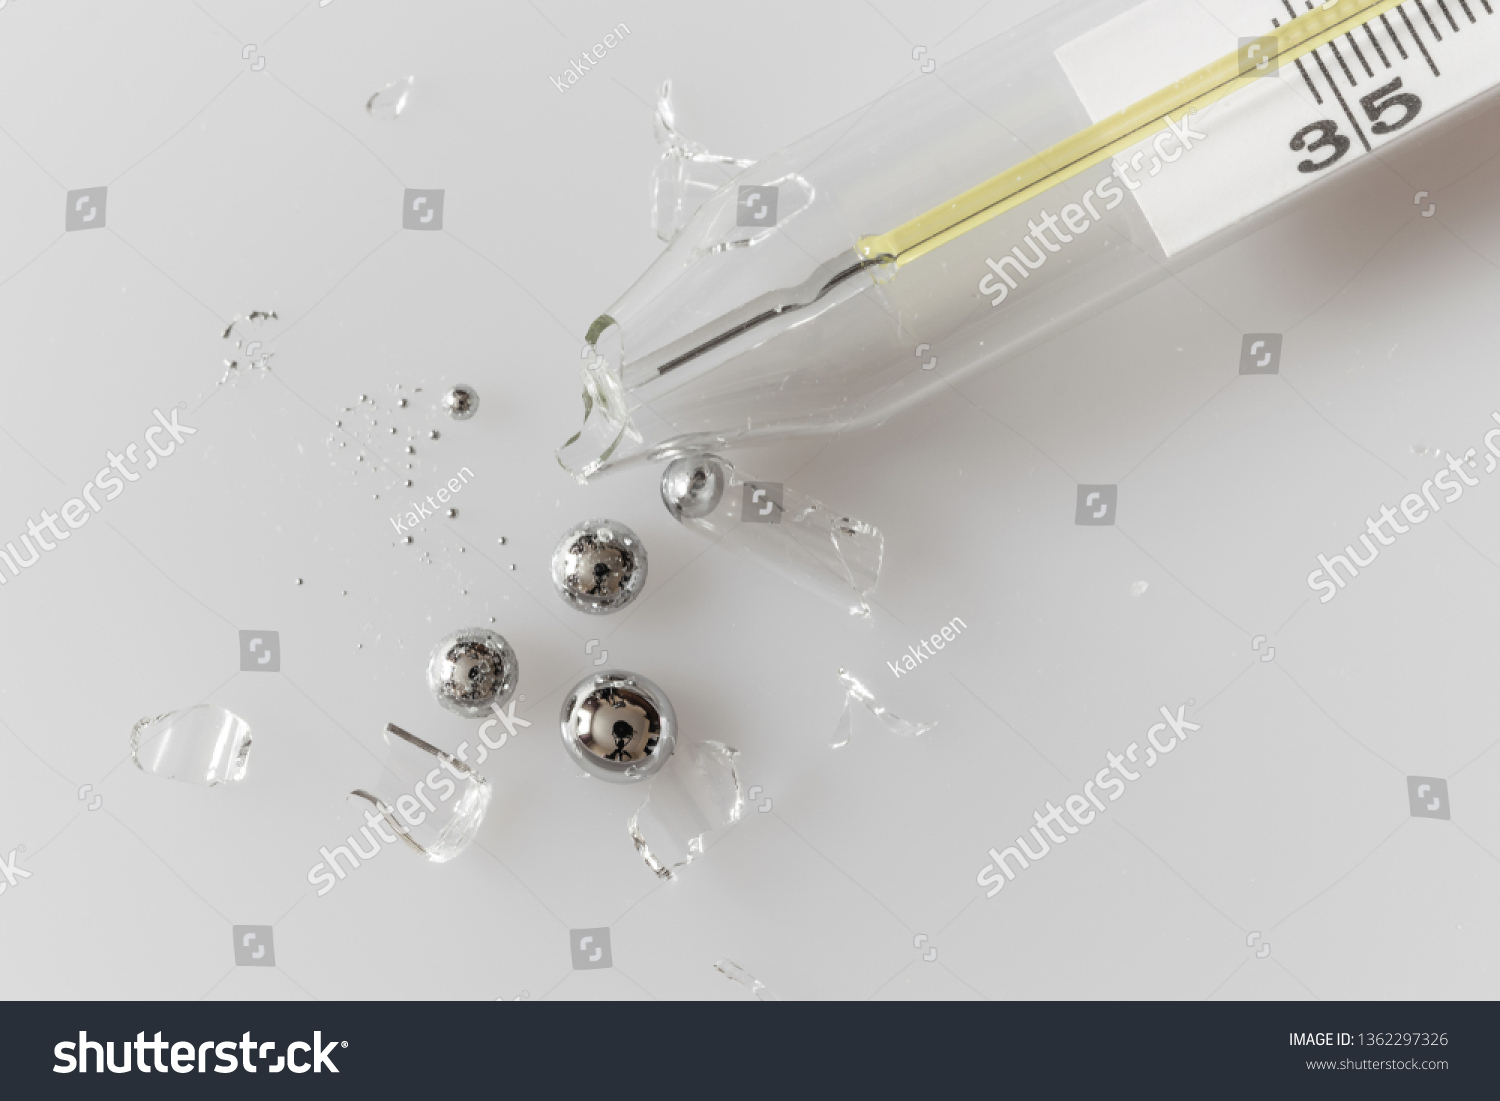 Broken glass mercury thermometer on light grey surface. Mercury drops with glass fragments. Mercury vapor poisoning. #1362297326